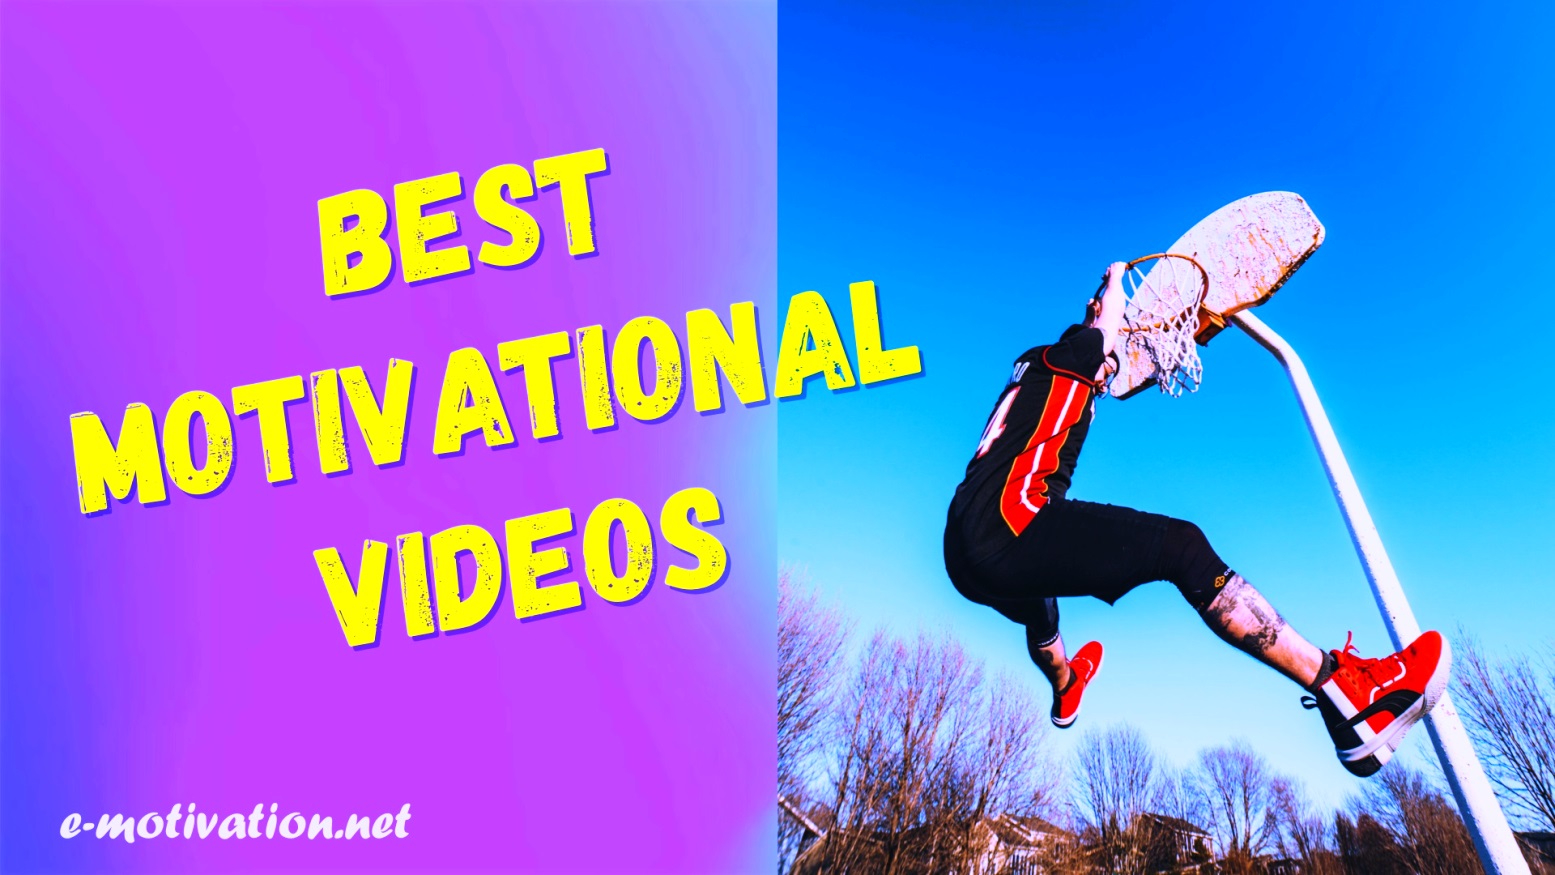 Best Motivational and Inspirational Video Collection